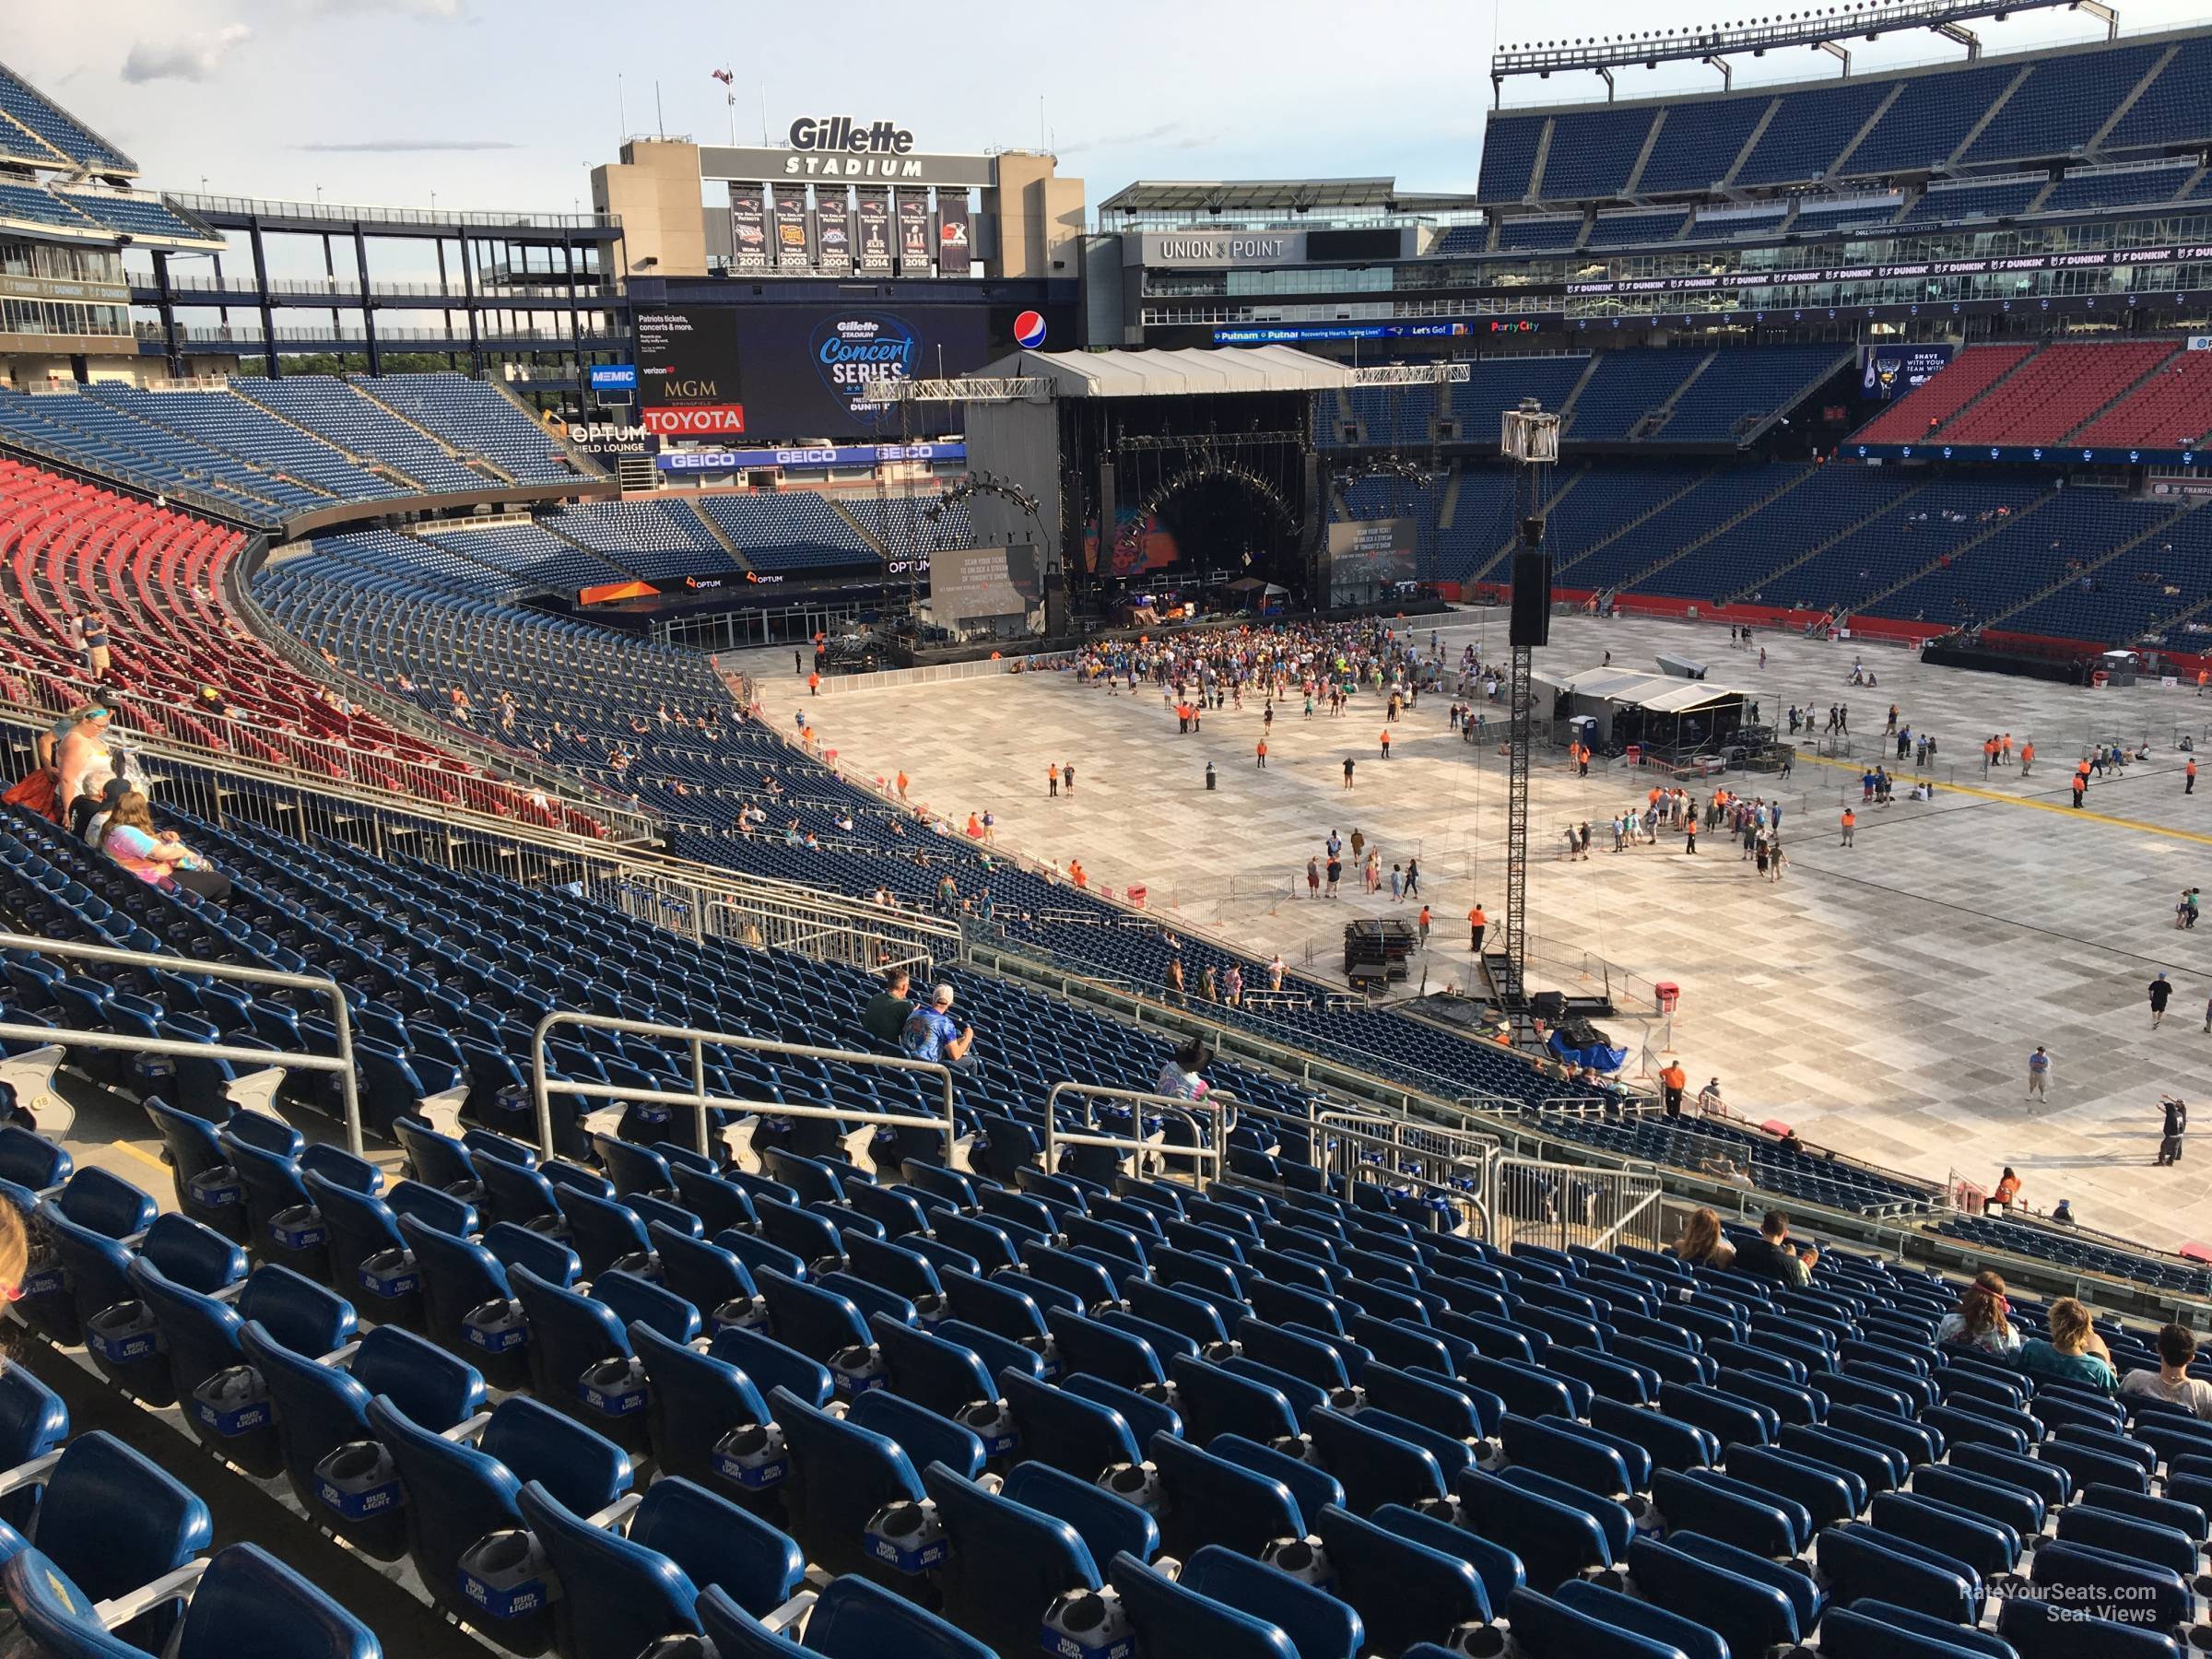 Gillette Stadium Section 204 Concert Seating - RateYourSeats.com